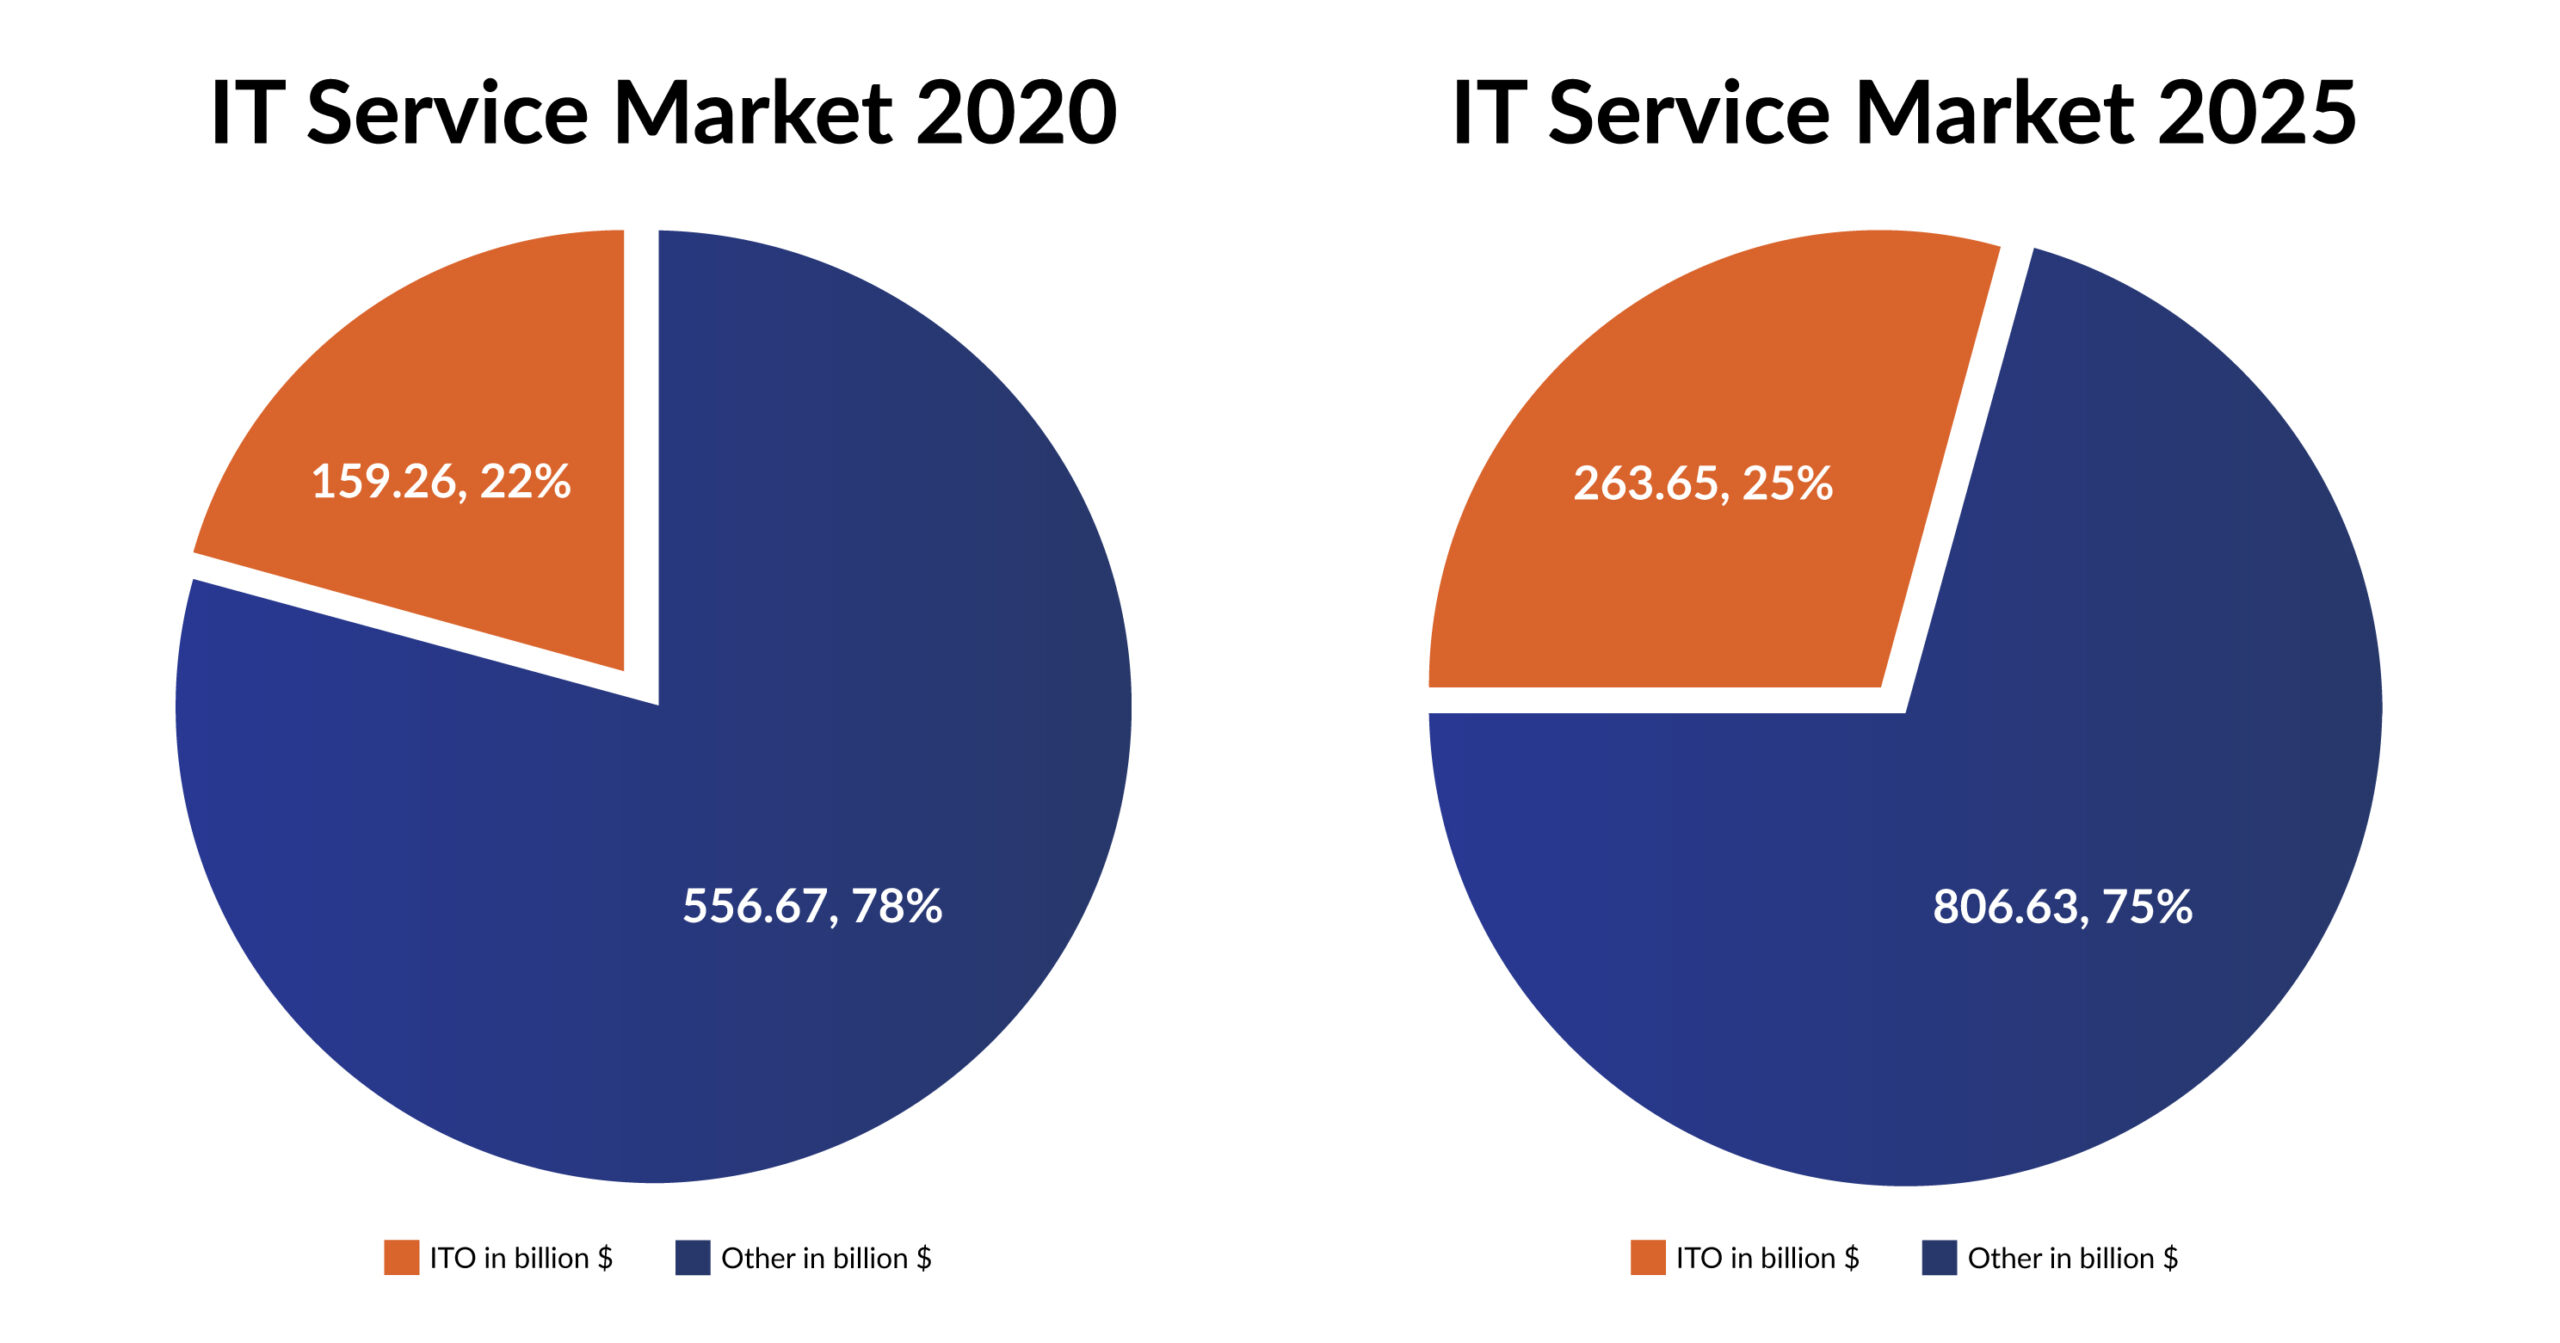 Infographic showing IT services market value from 2020 to 2025